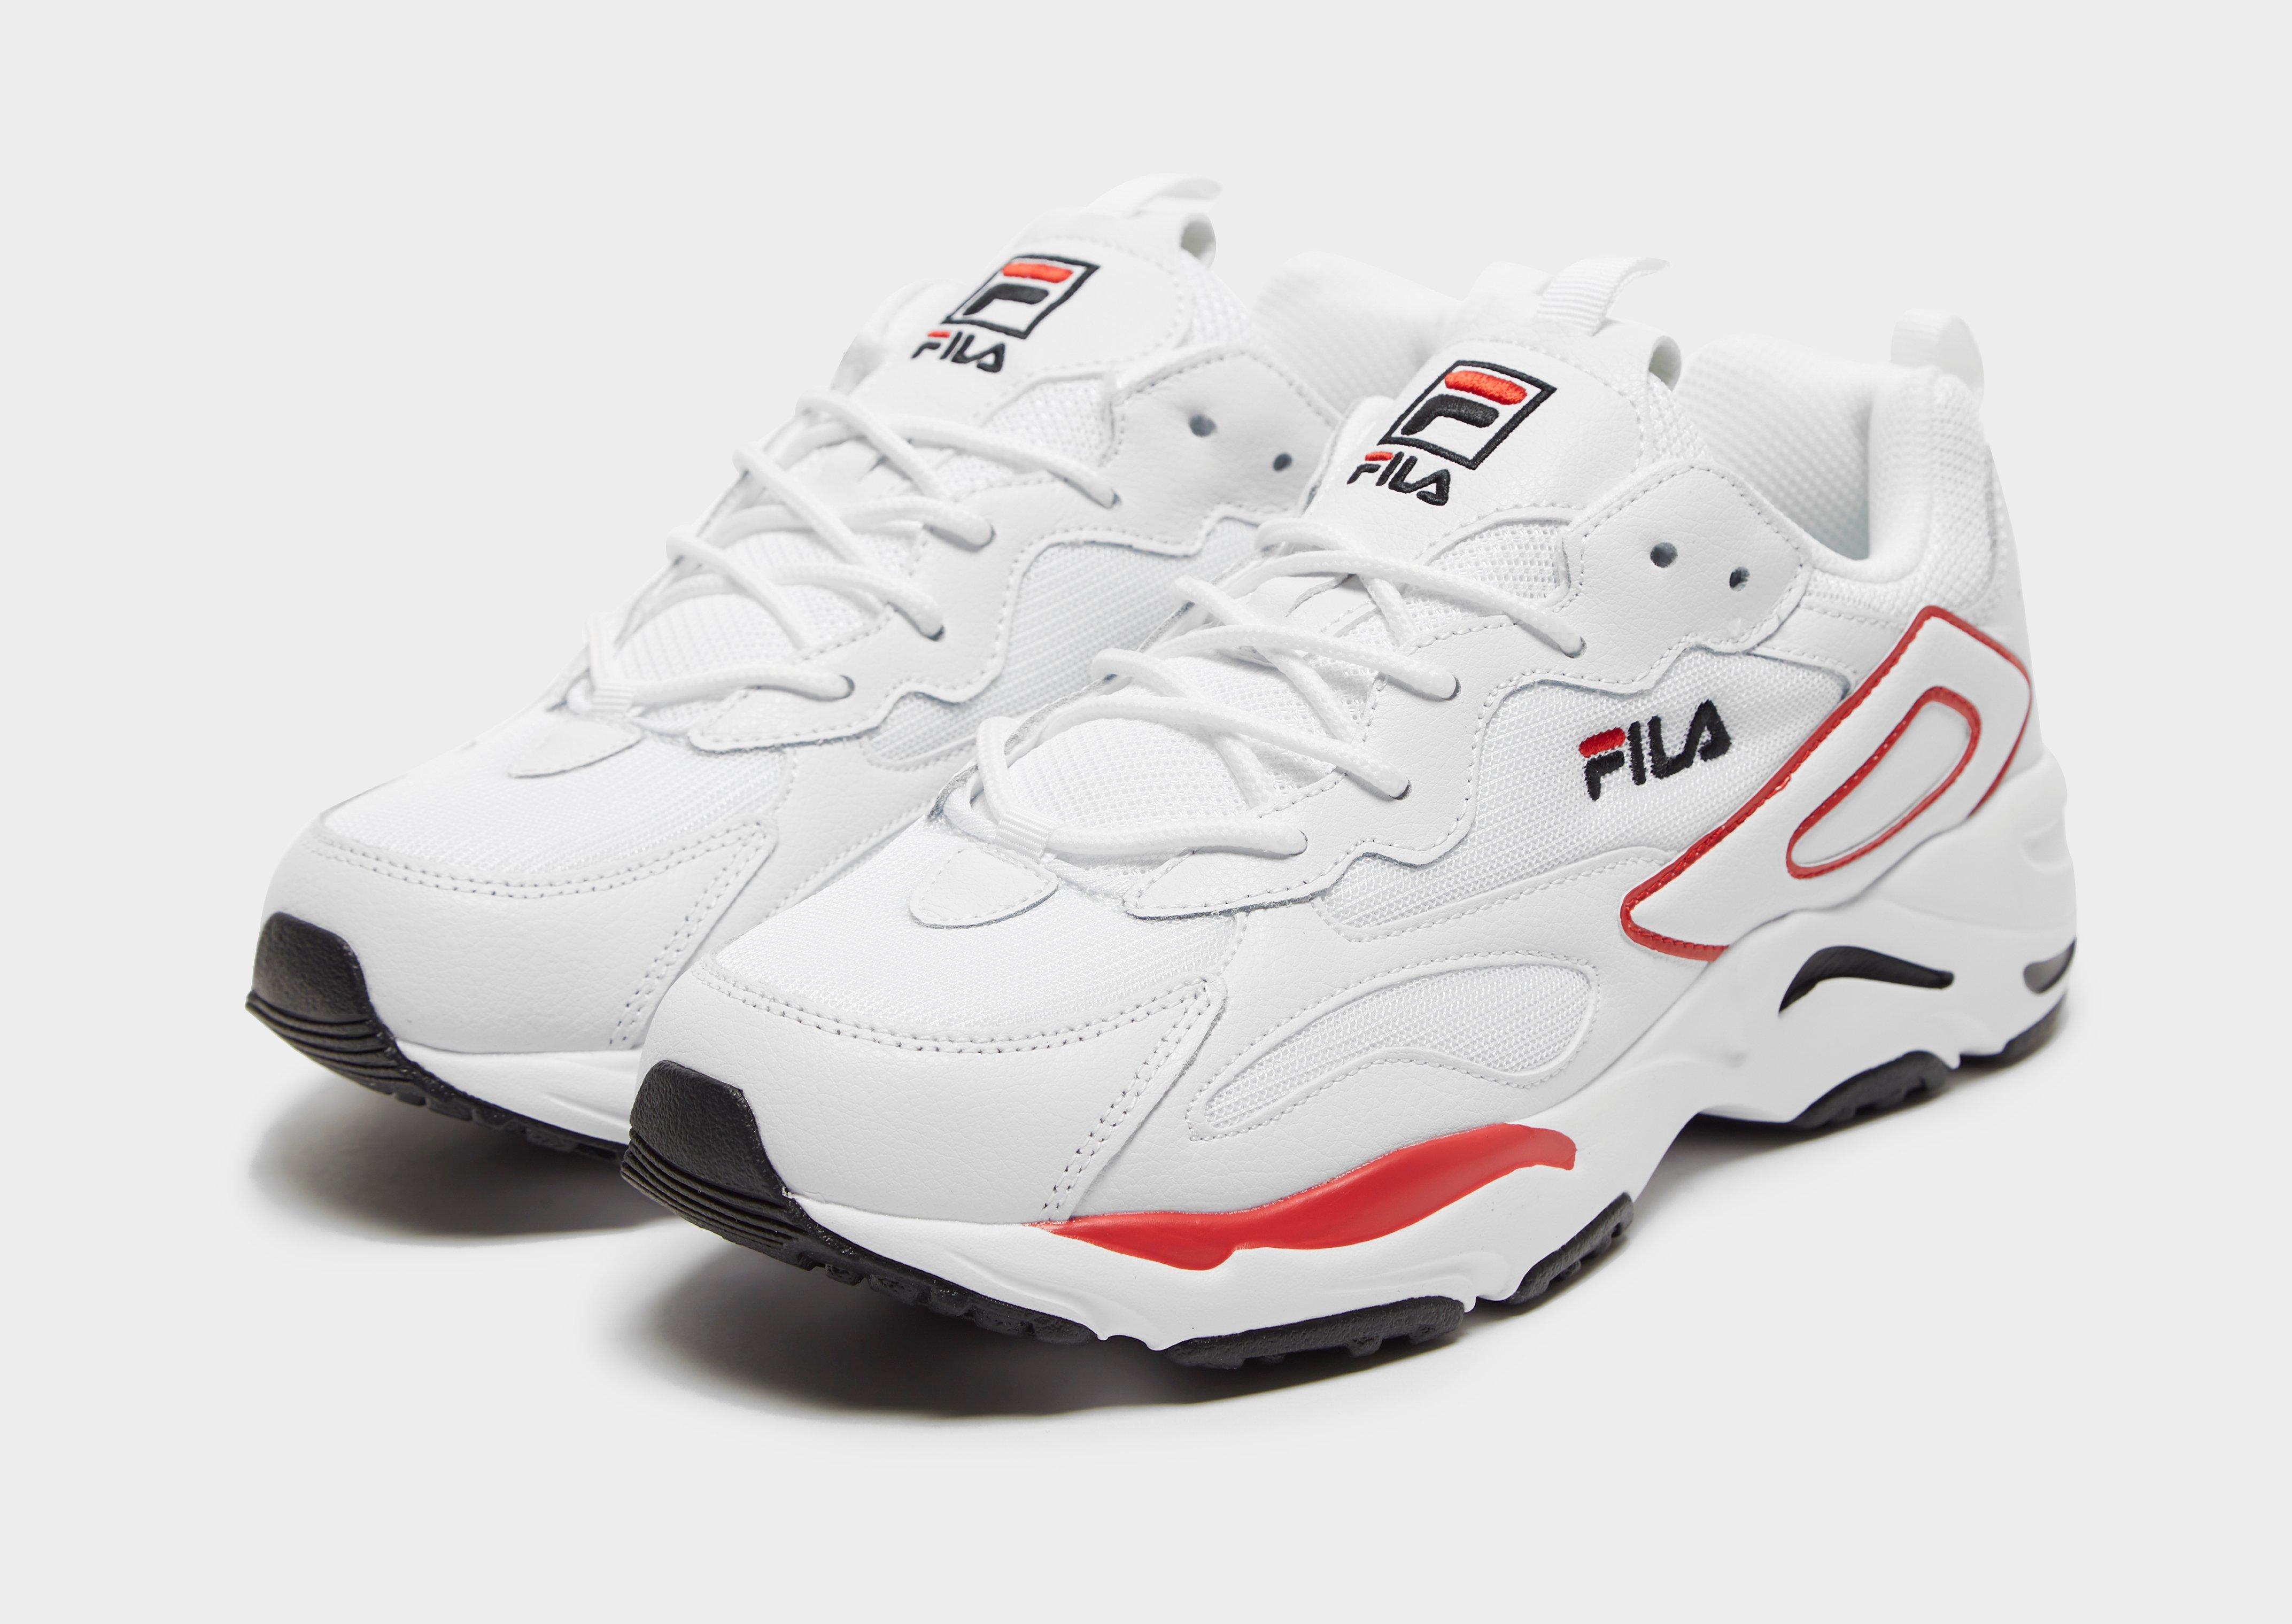 soldes fila ray tracer homme 